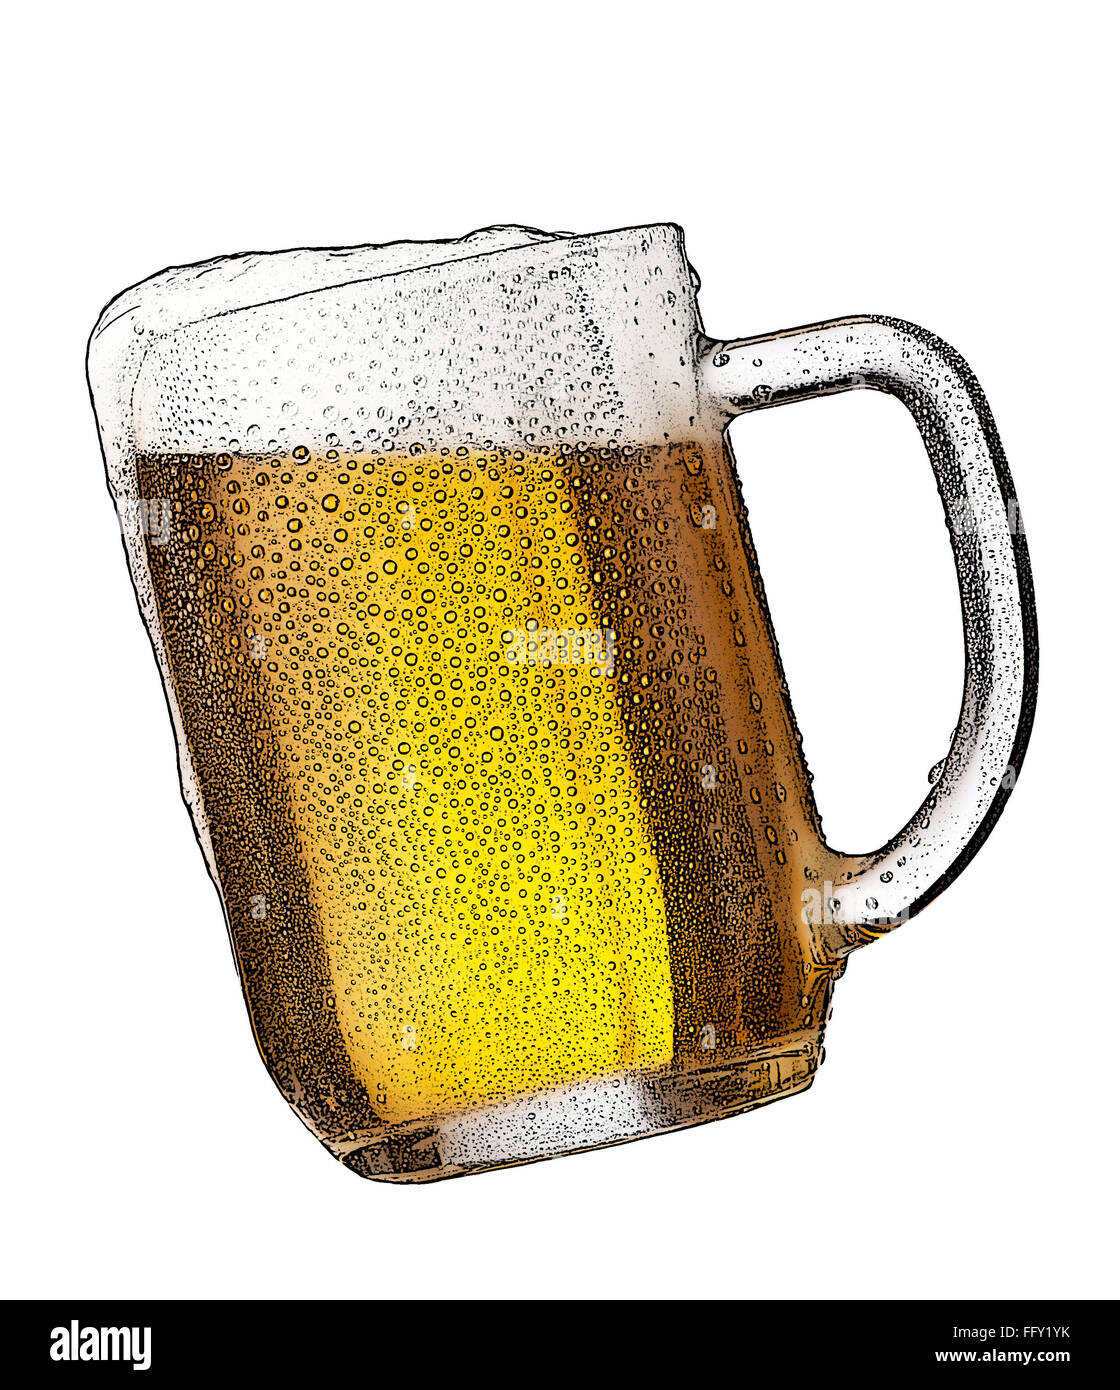 illustration of beer glass on the white background Stock Photo